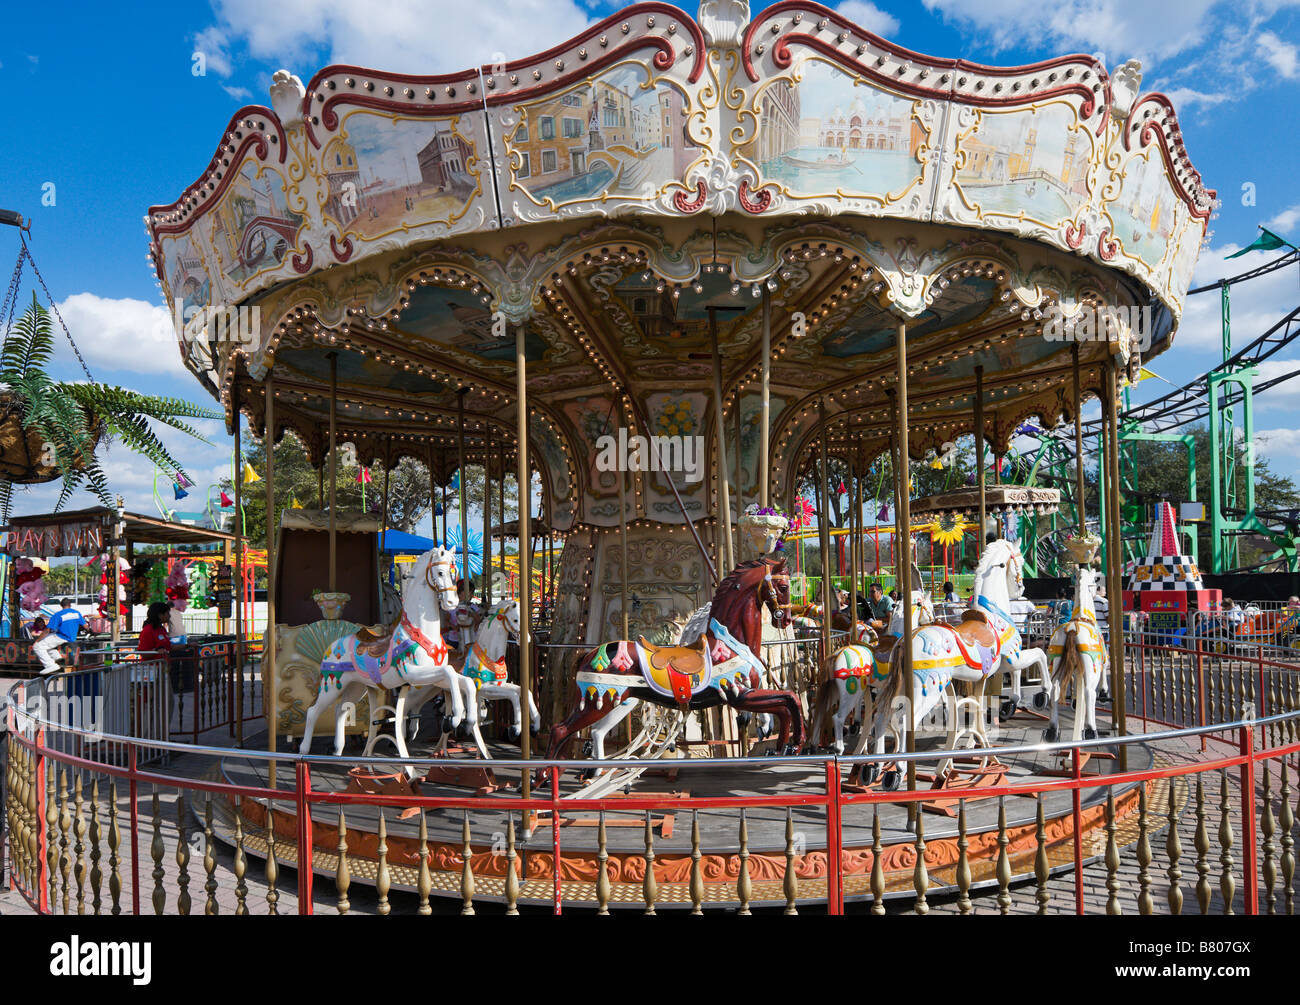 Karussell in Old Town Kissimmee auf US 192, Kissimmee, Orlando, Zentral-Florida, USA Stockfoto